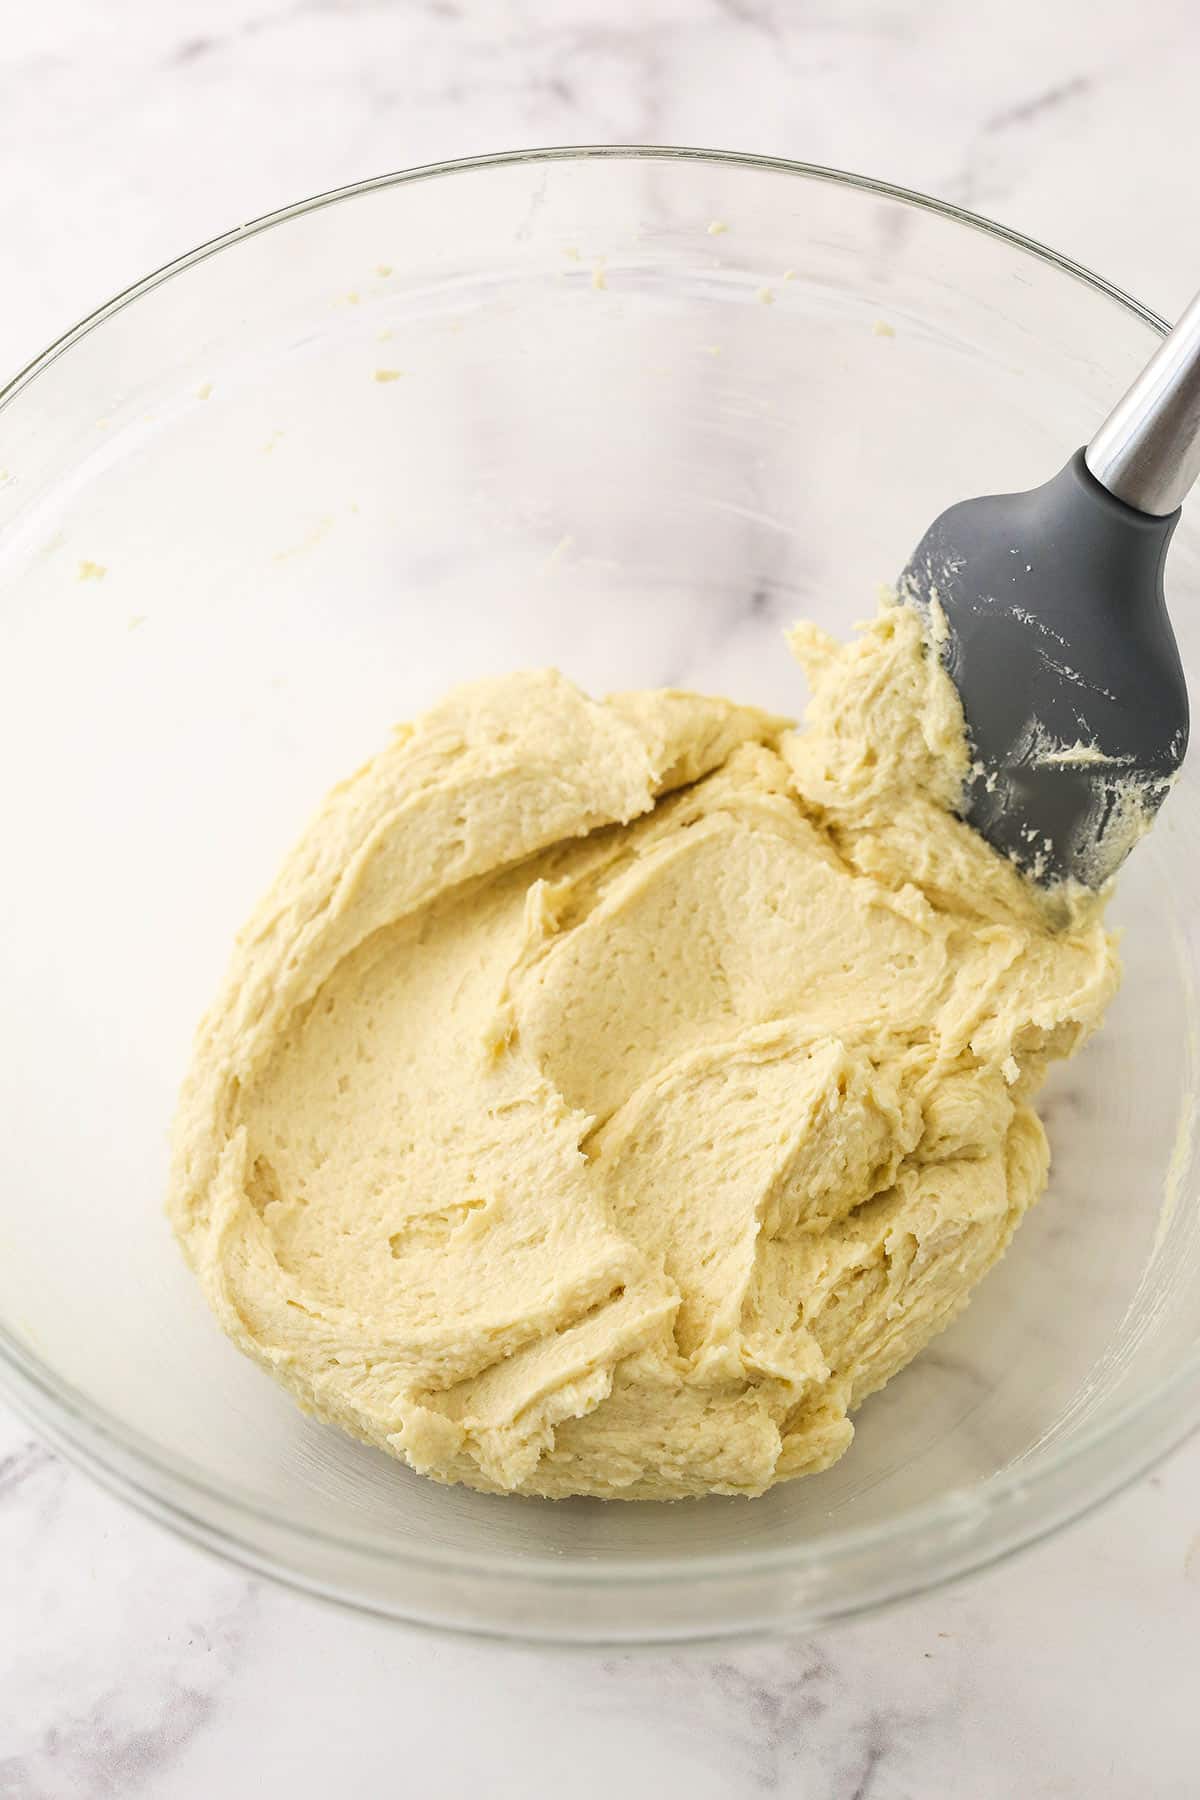 Creamed butter with egg and vanilla extract.